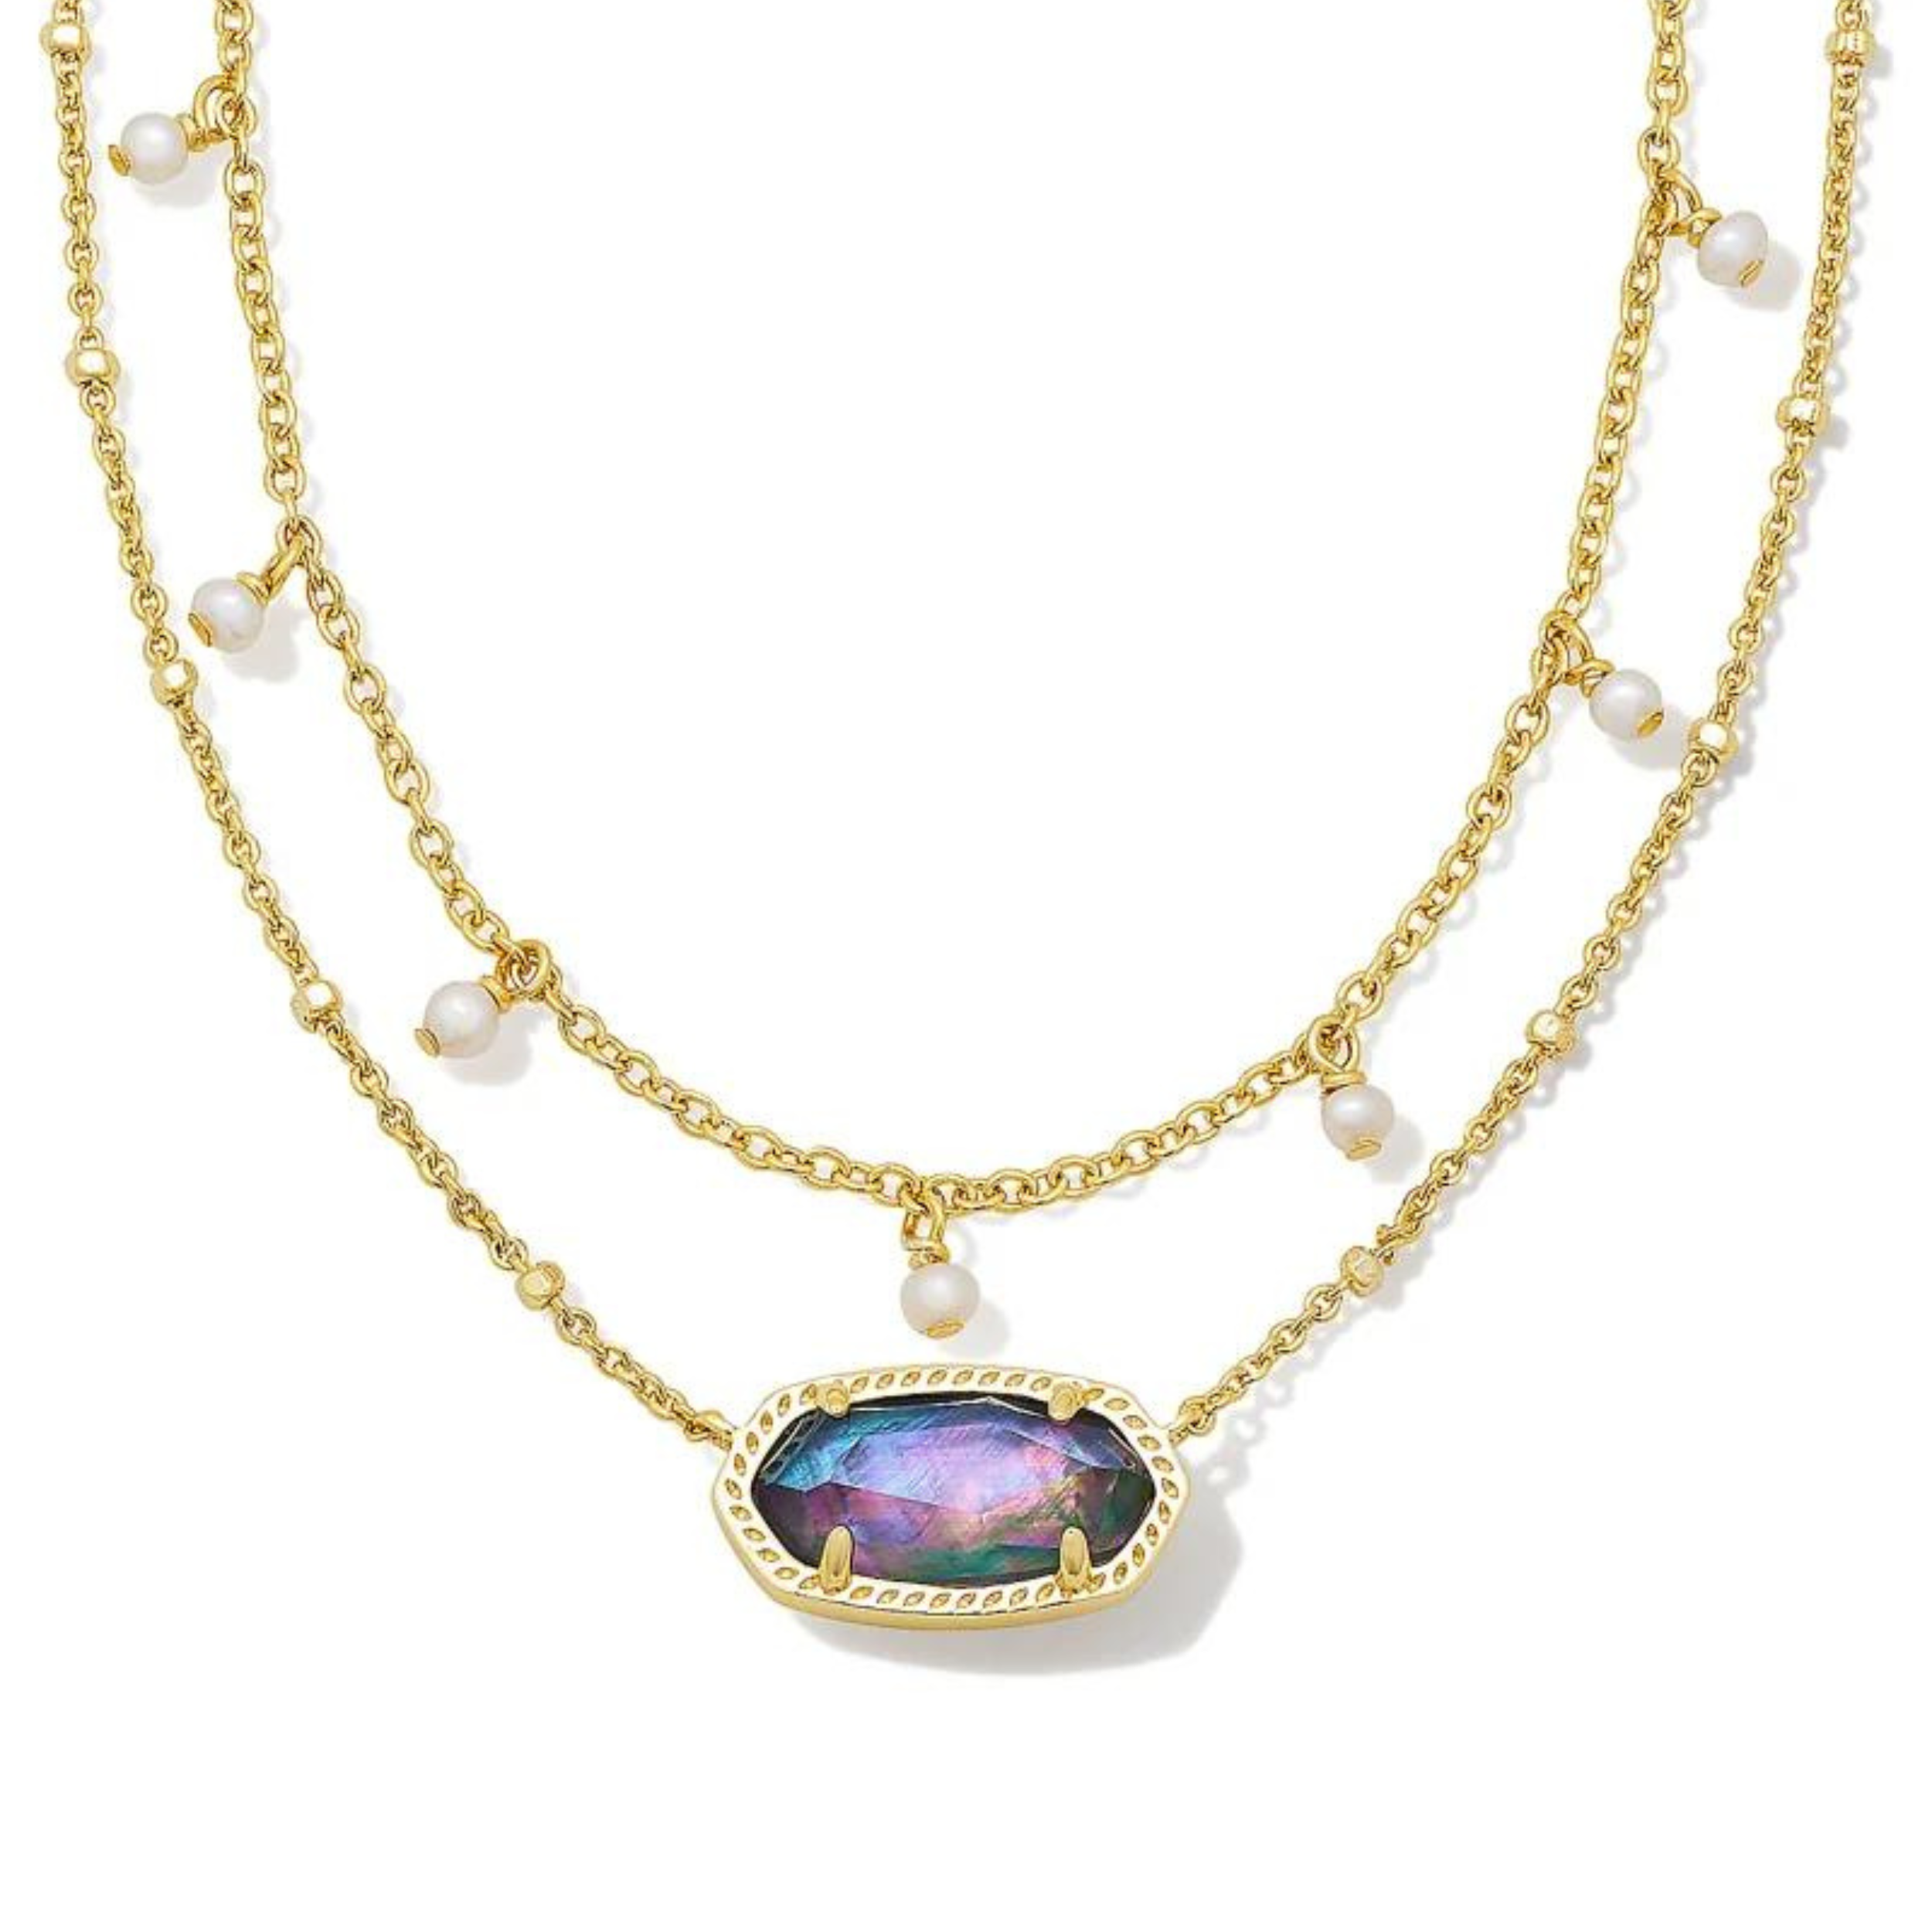 Kendra Scott | Elisa Gold Pearl Multi Strand Necklace in Lilac Abalone. Pictured on a white background.